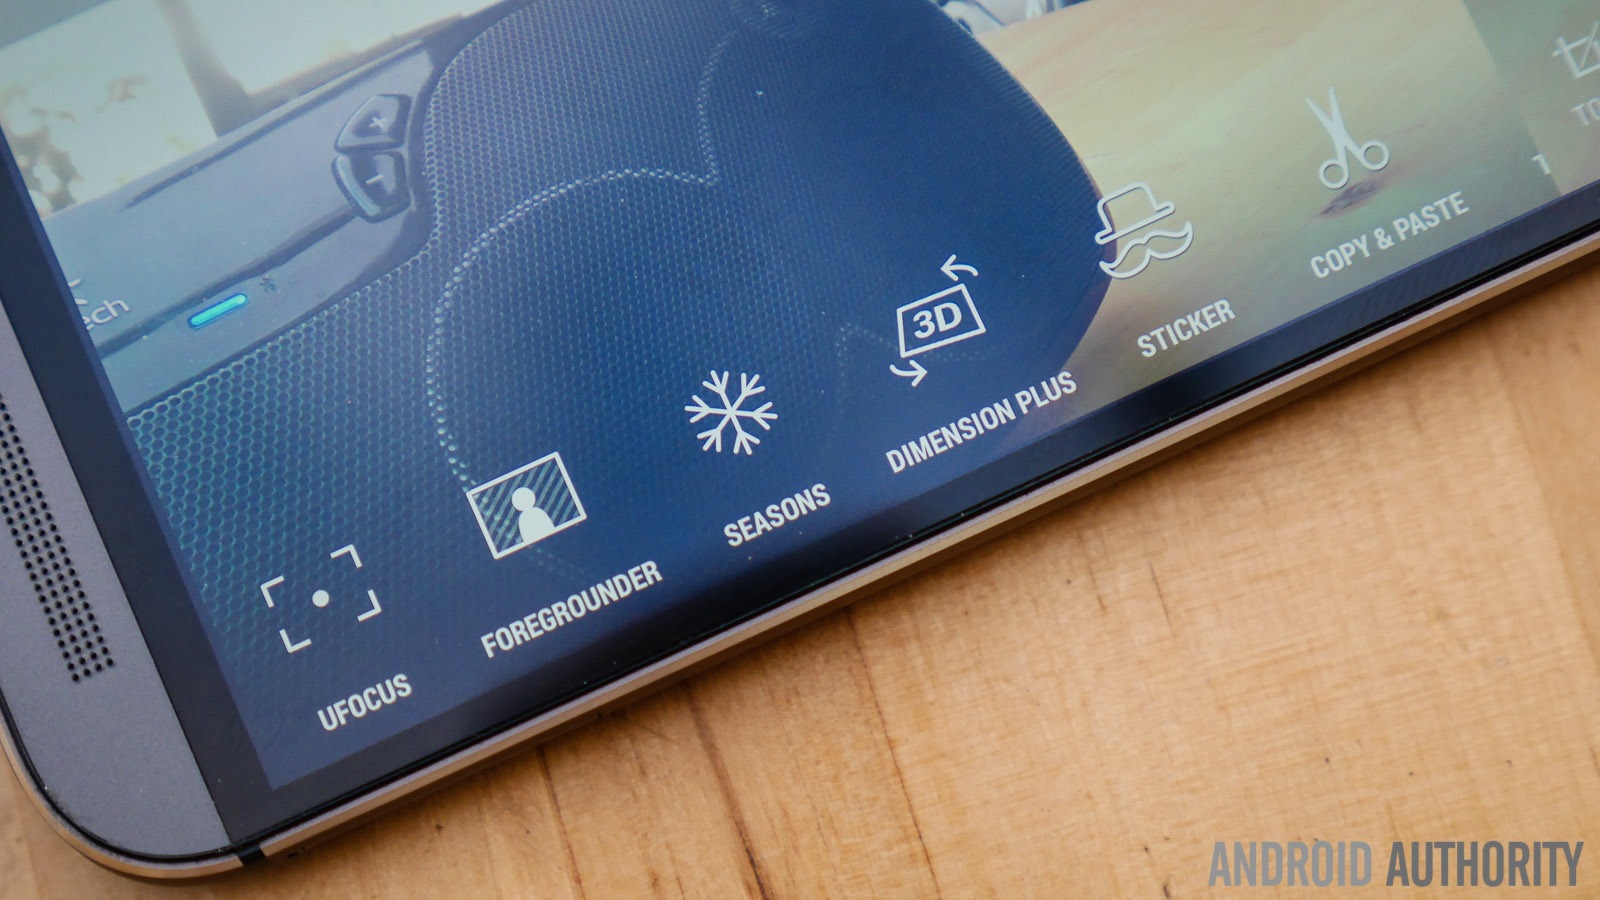 htc one m8 outdoors (15 of 17) market share